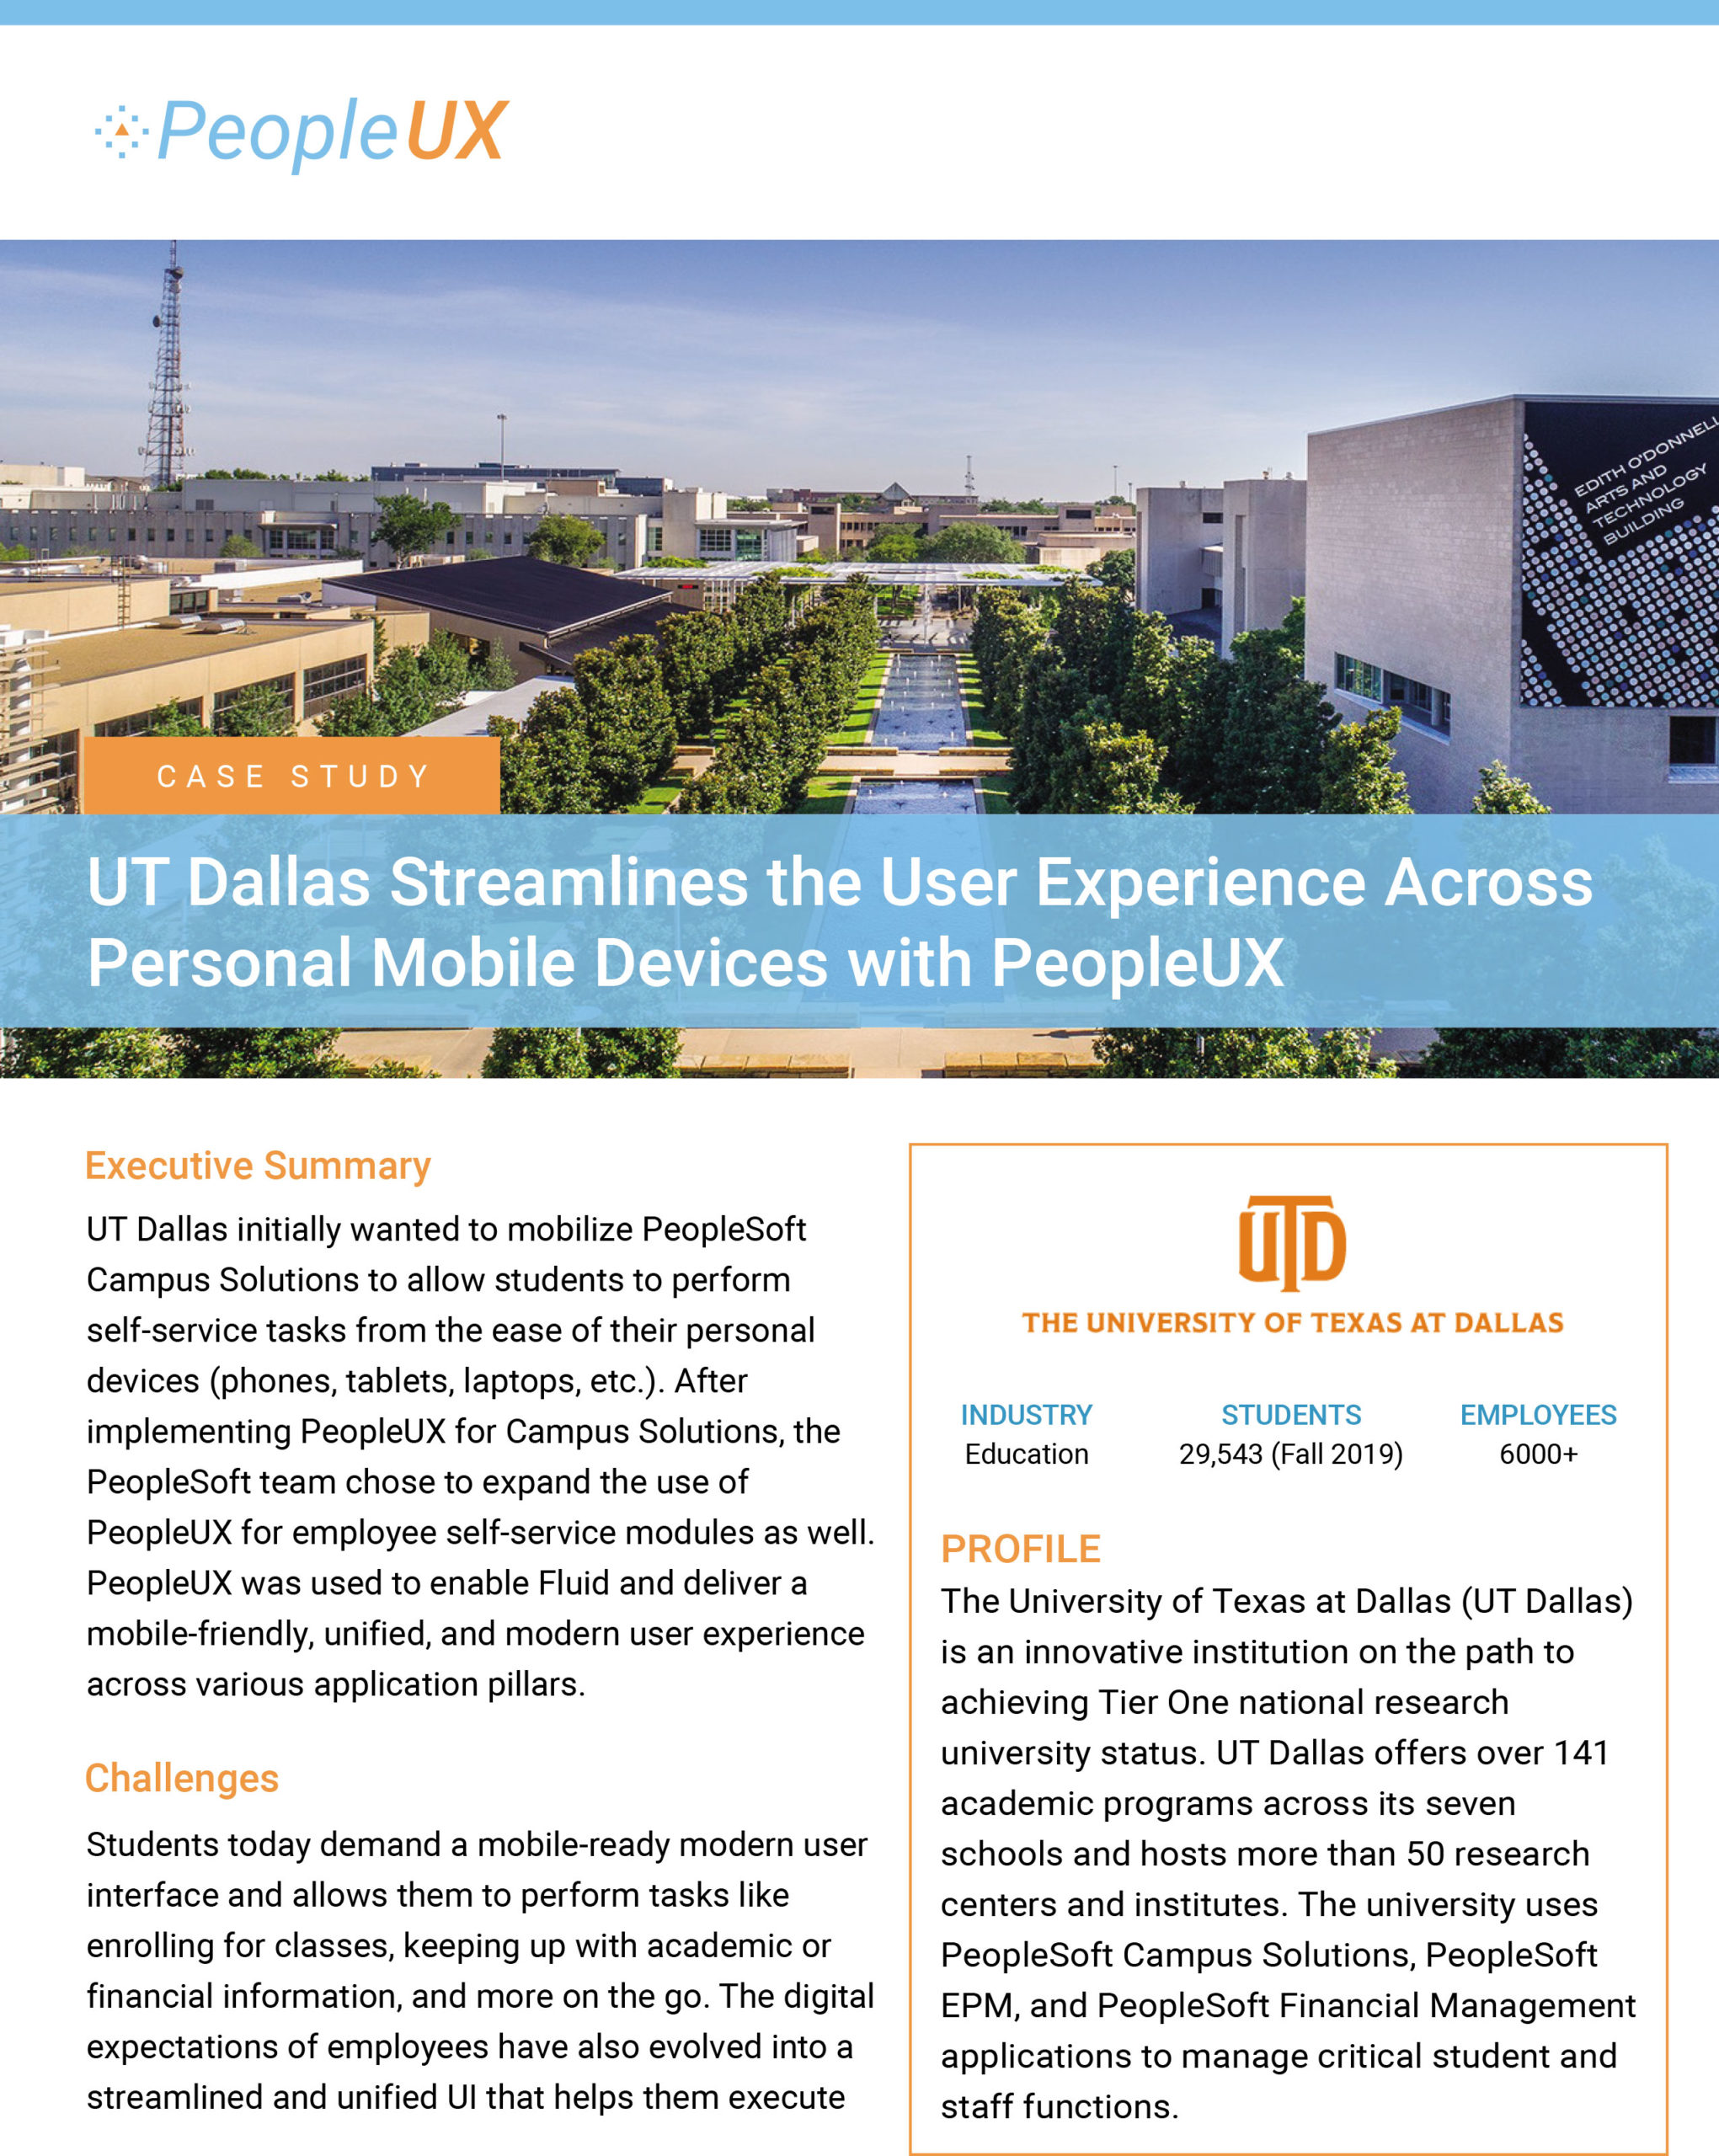 UT Dallas Streamlines the User Experience Across Personal Mobile Devices with PeopleUX